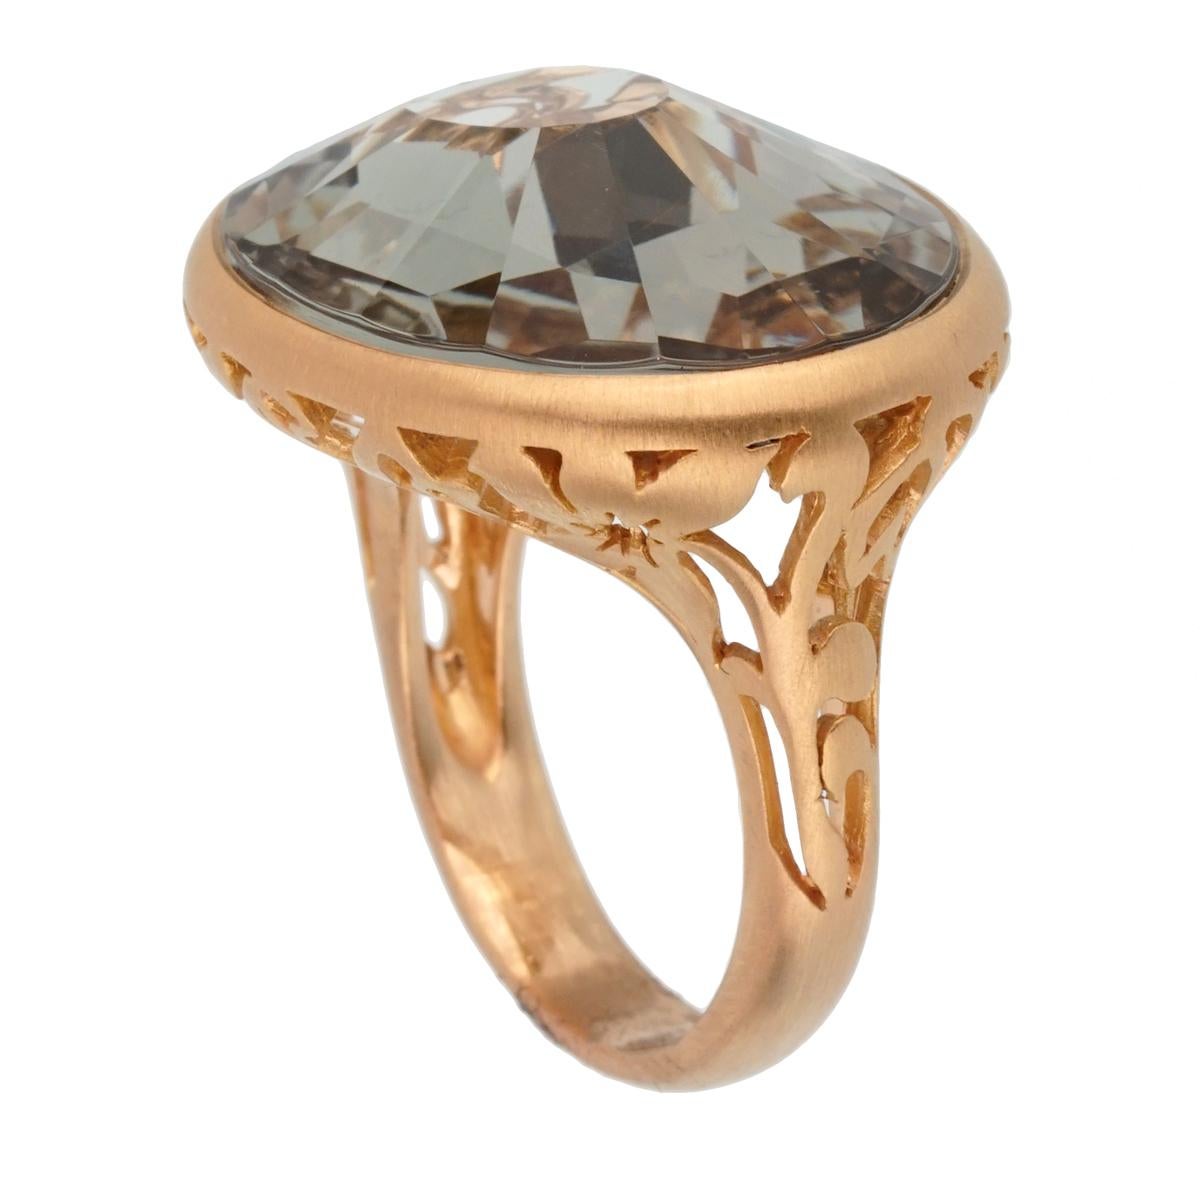 A chic brand new Pomellato cocktail ring showcasing a 10.19ct Green Prasiolite set in 18k rose gold. The ring measures a size 7 1/4 and can be resized

Pomellato Retail: $5500
Sku: 2437